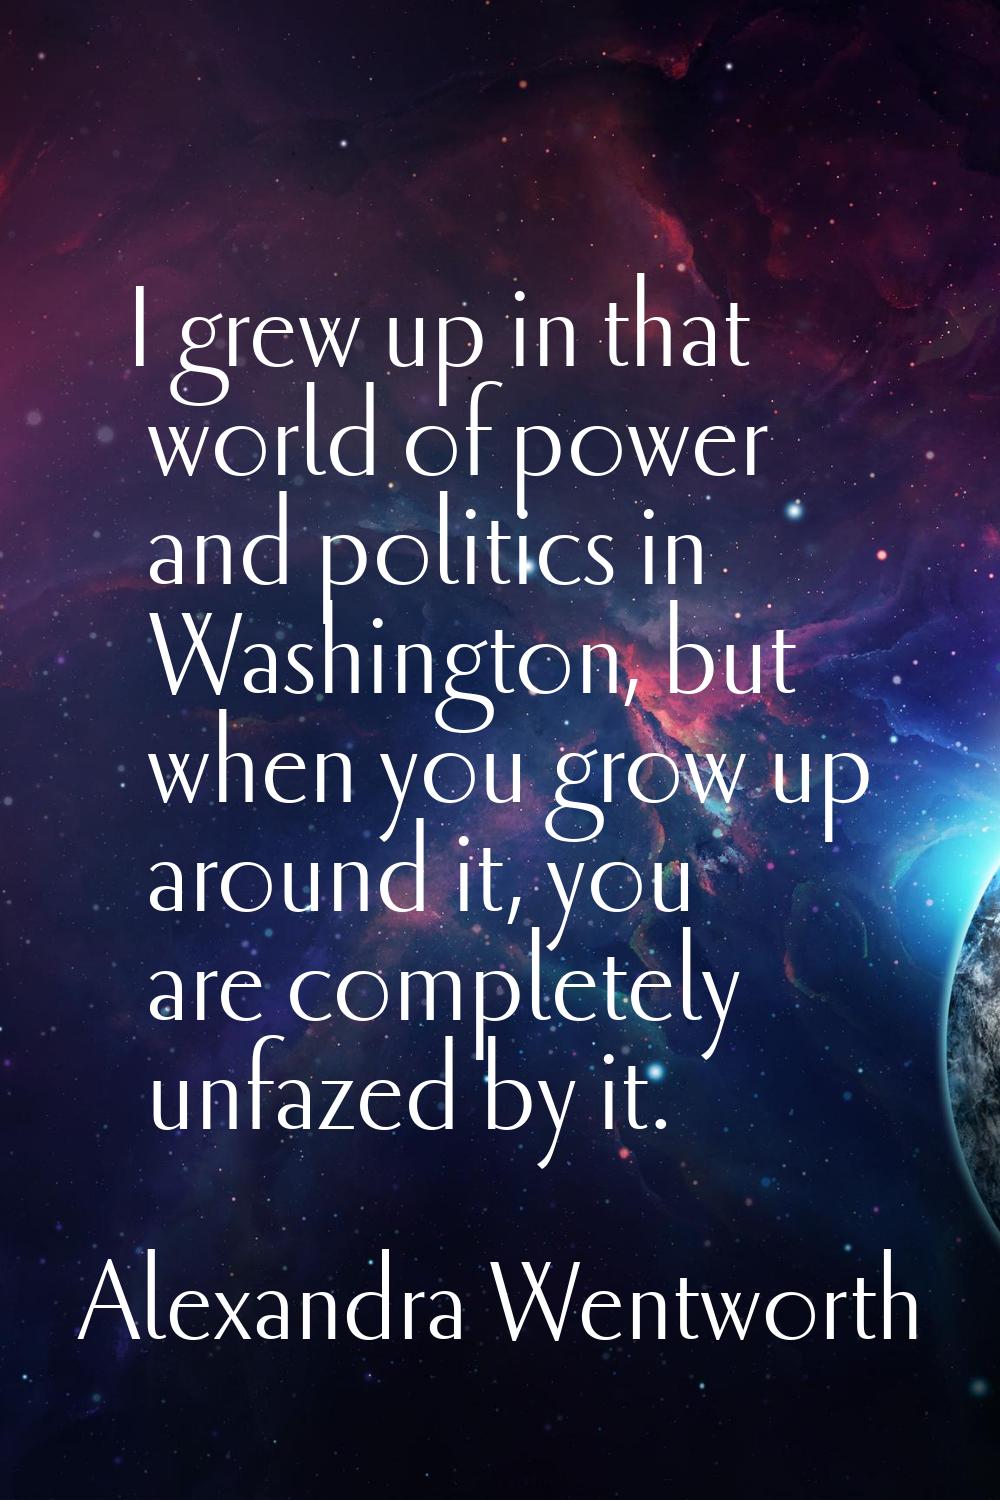 I grew up in that world of power and politics in Washington, but when you grow up around it, you ar